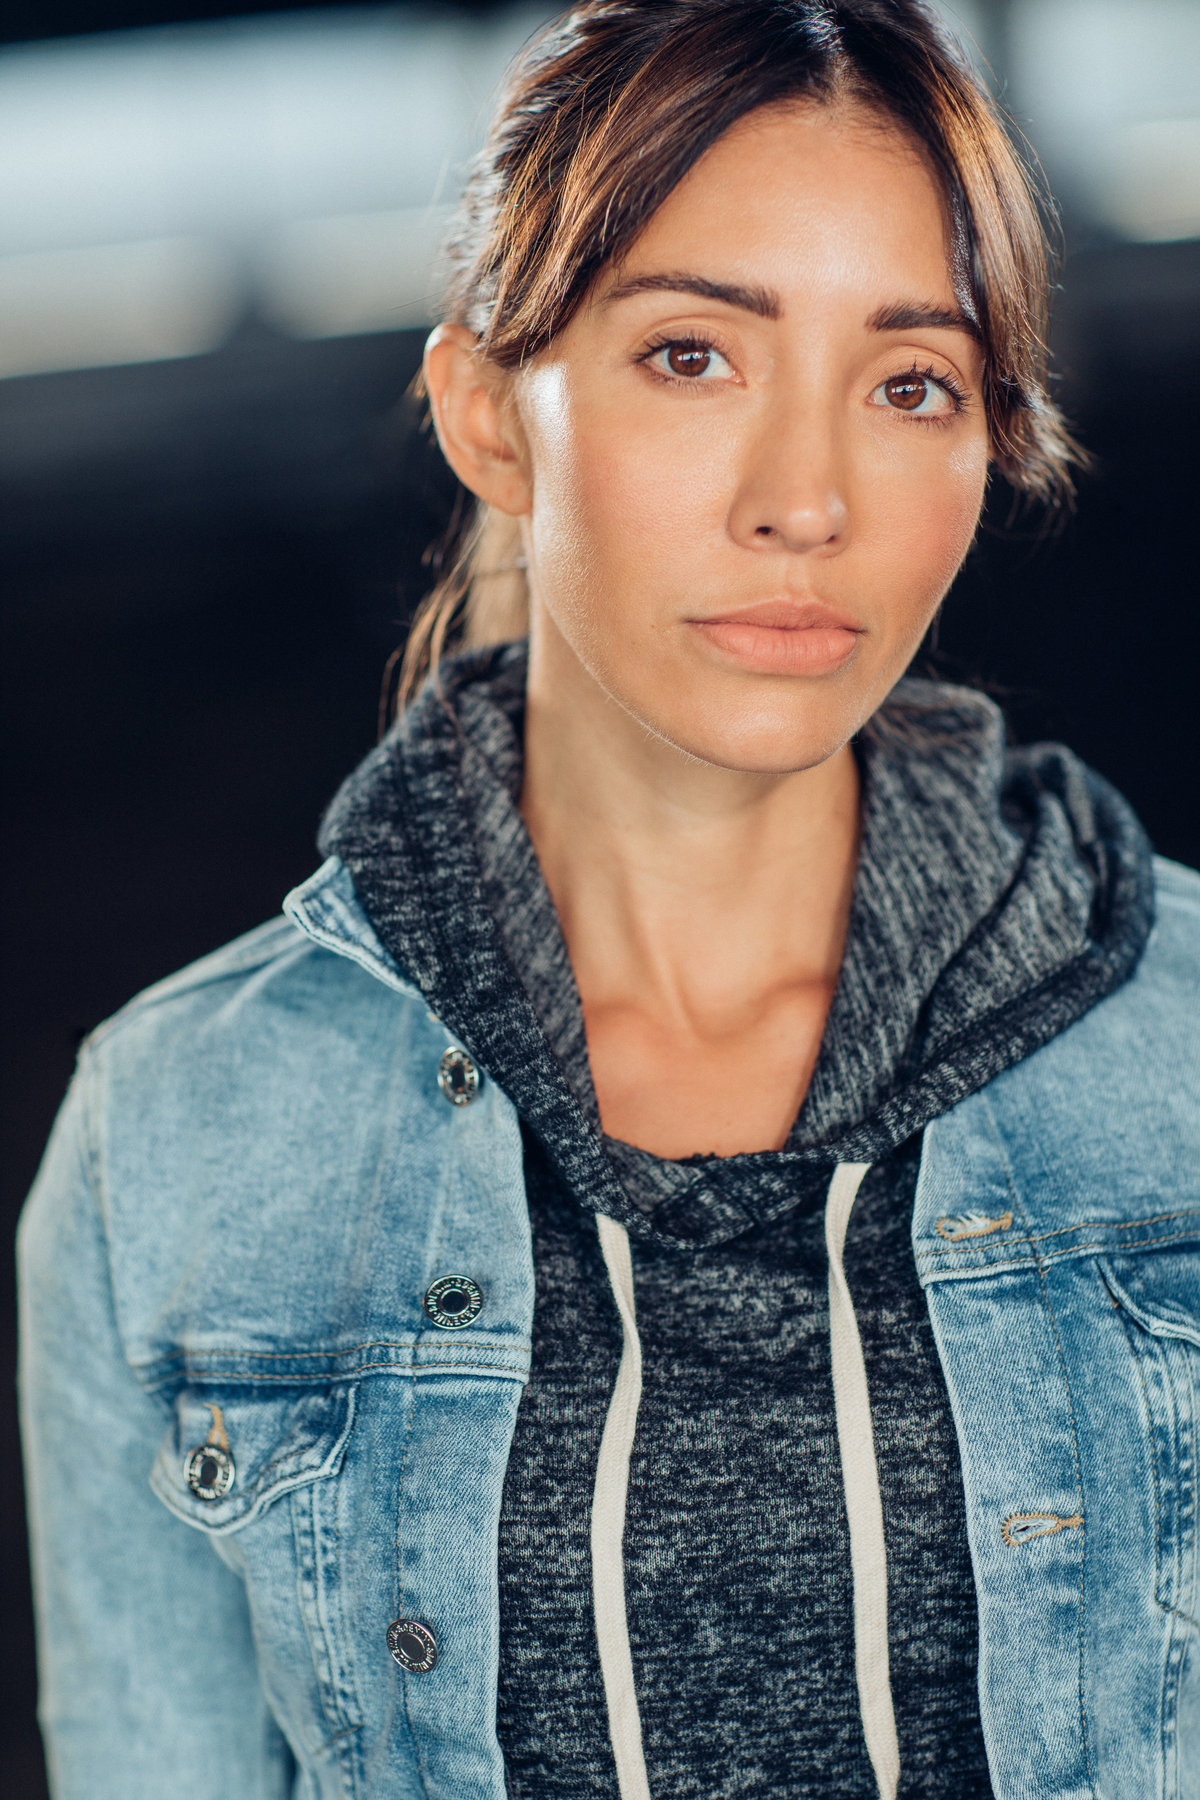 Headshot Photograph Of Young Woman In Outer Faded Denim Jacket And Inner Black Hoodie Los Angeles